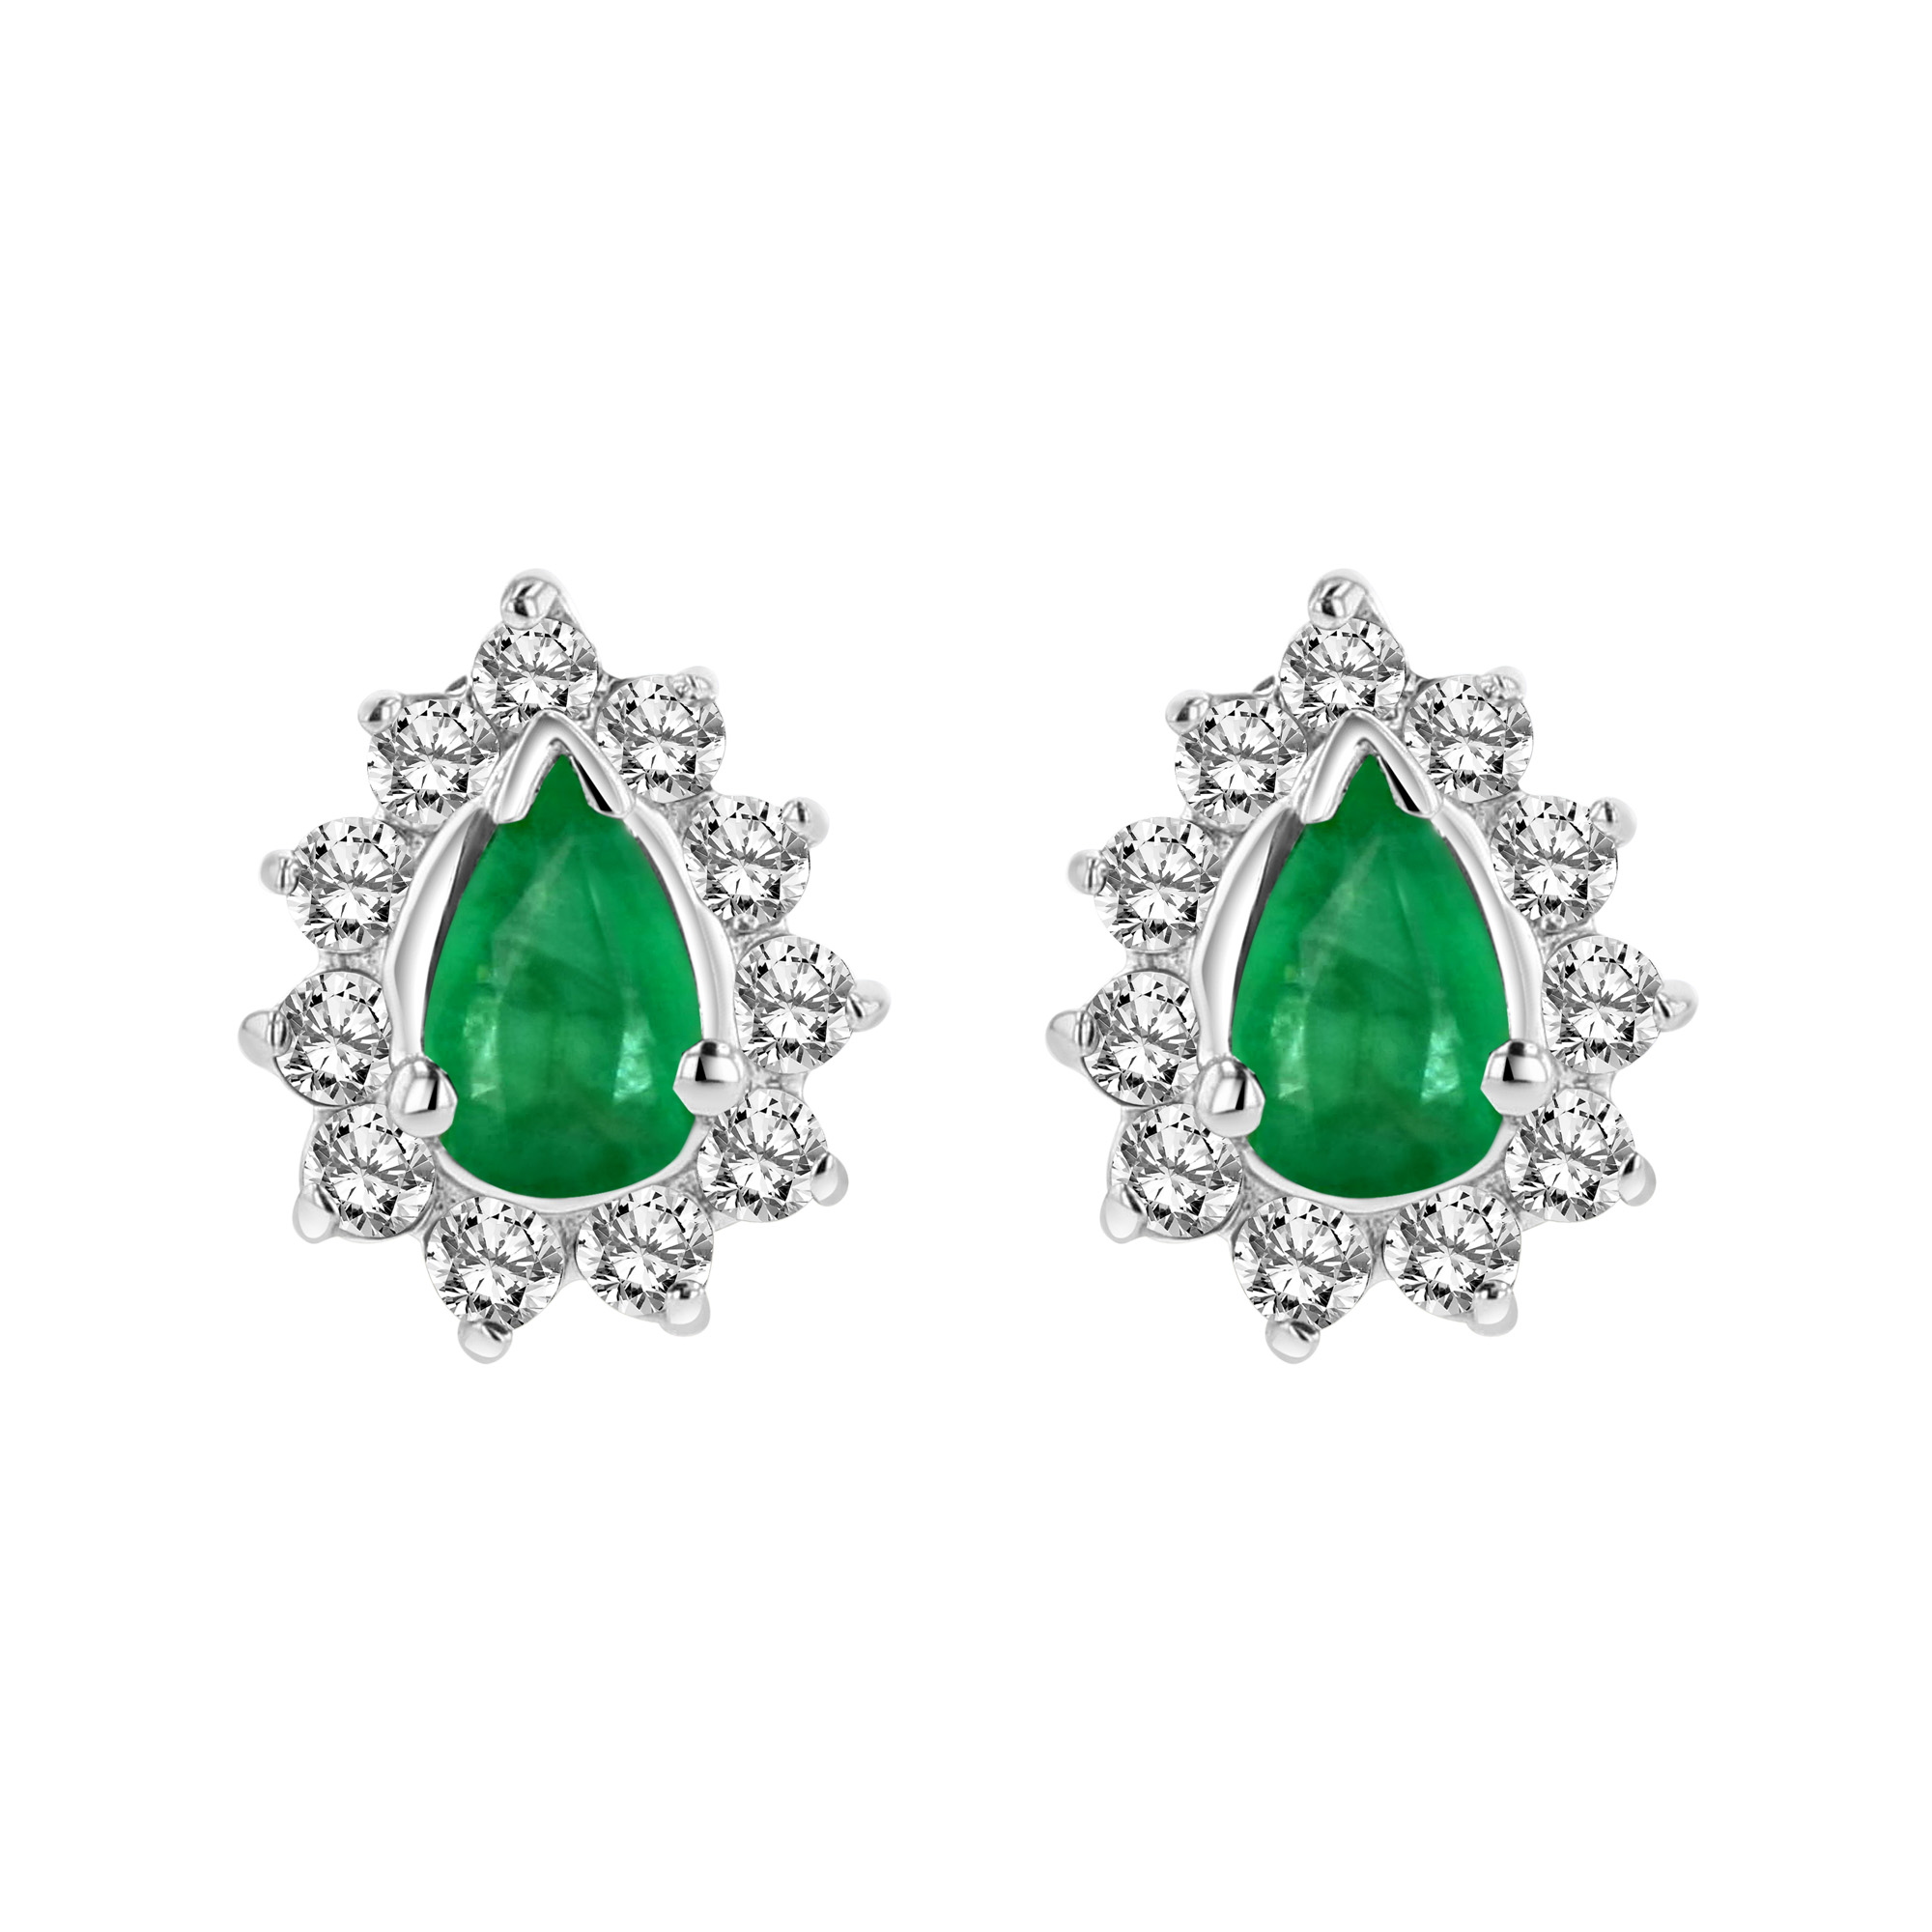 View 0.70cttw Diamond and Emerald Earrings in 14k Gold 